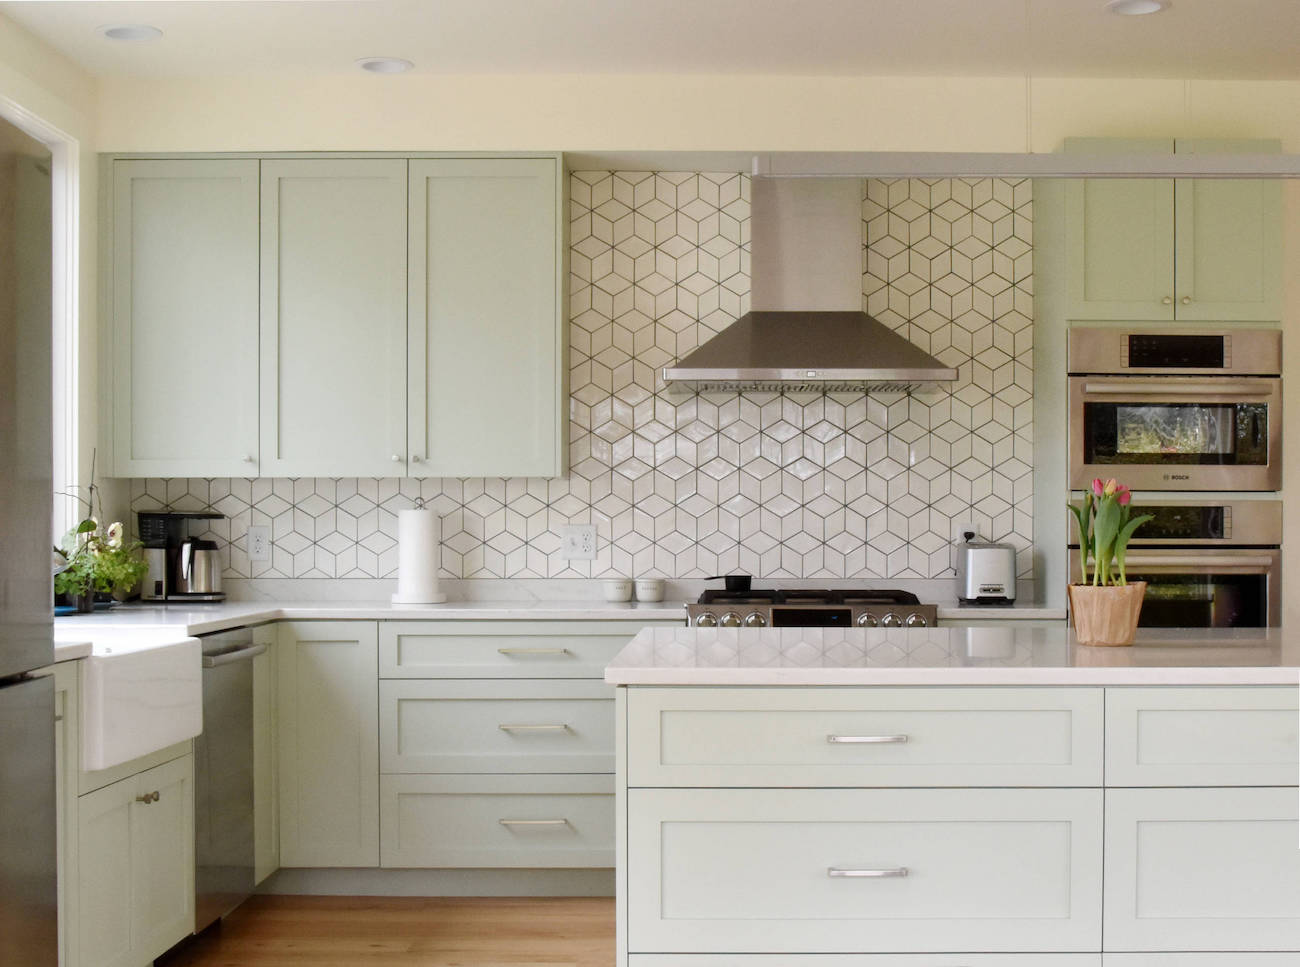 A pale green kitchen has a dual fuel range with gas stovetop.